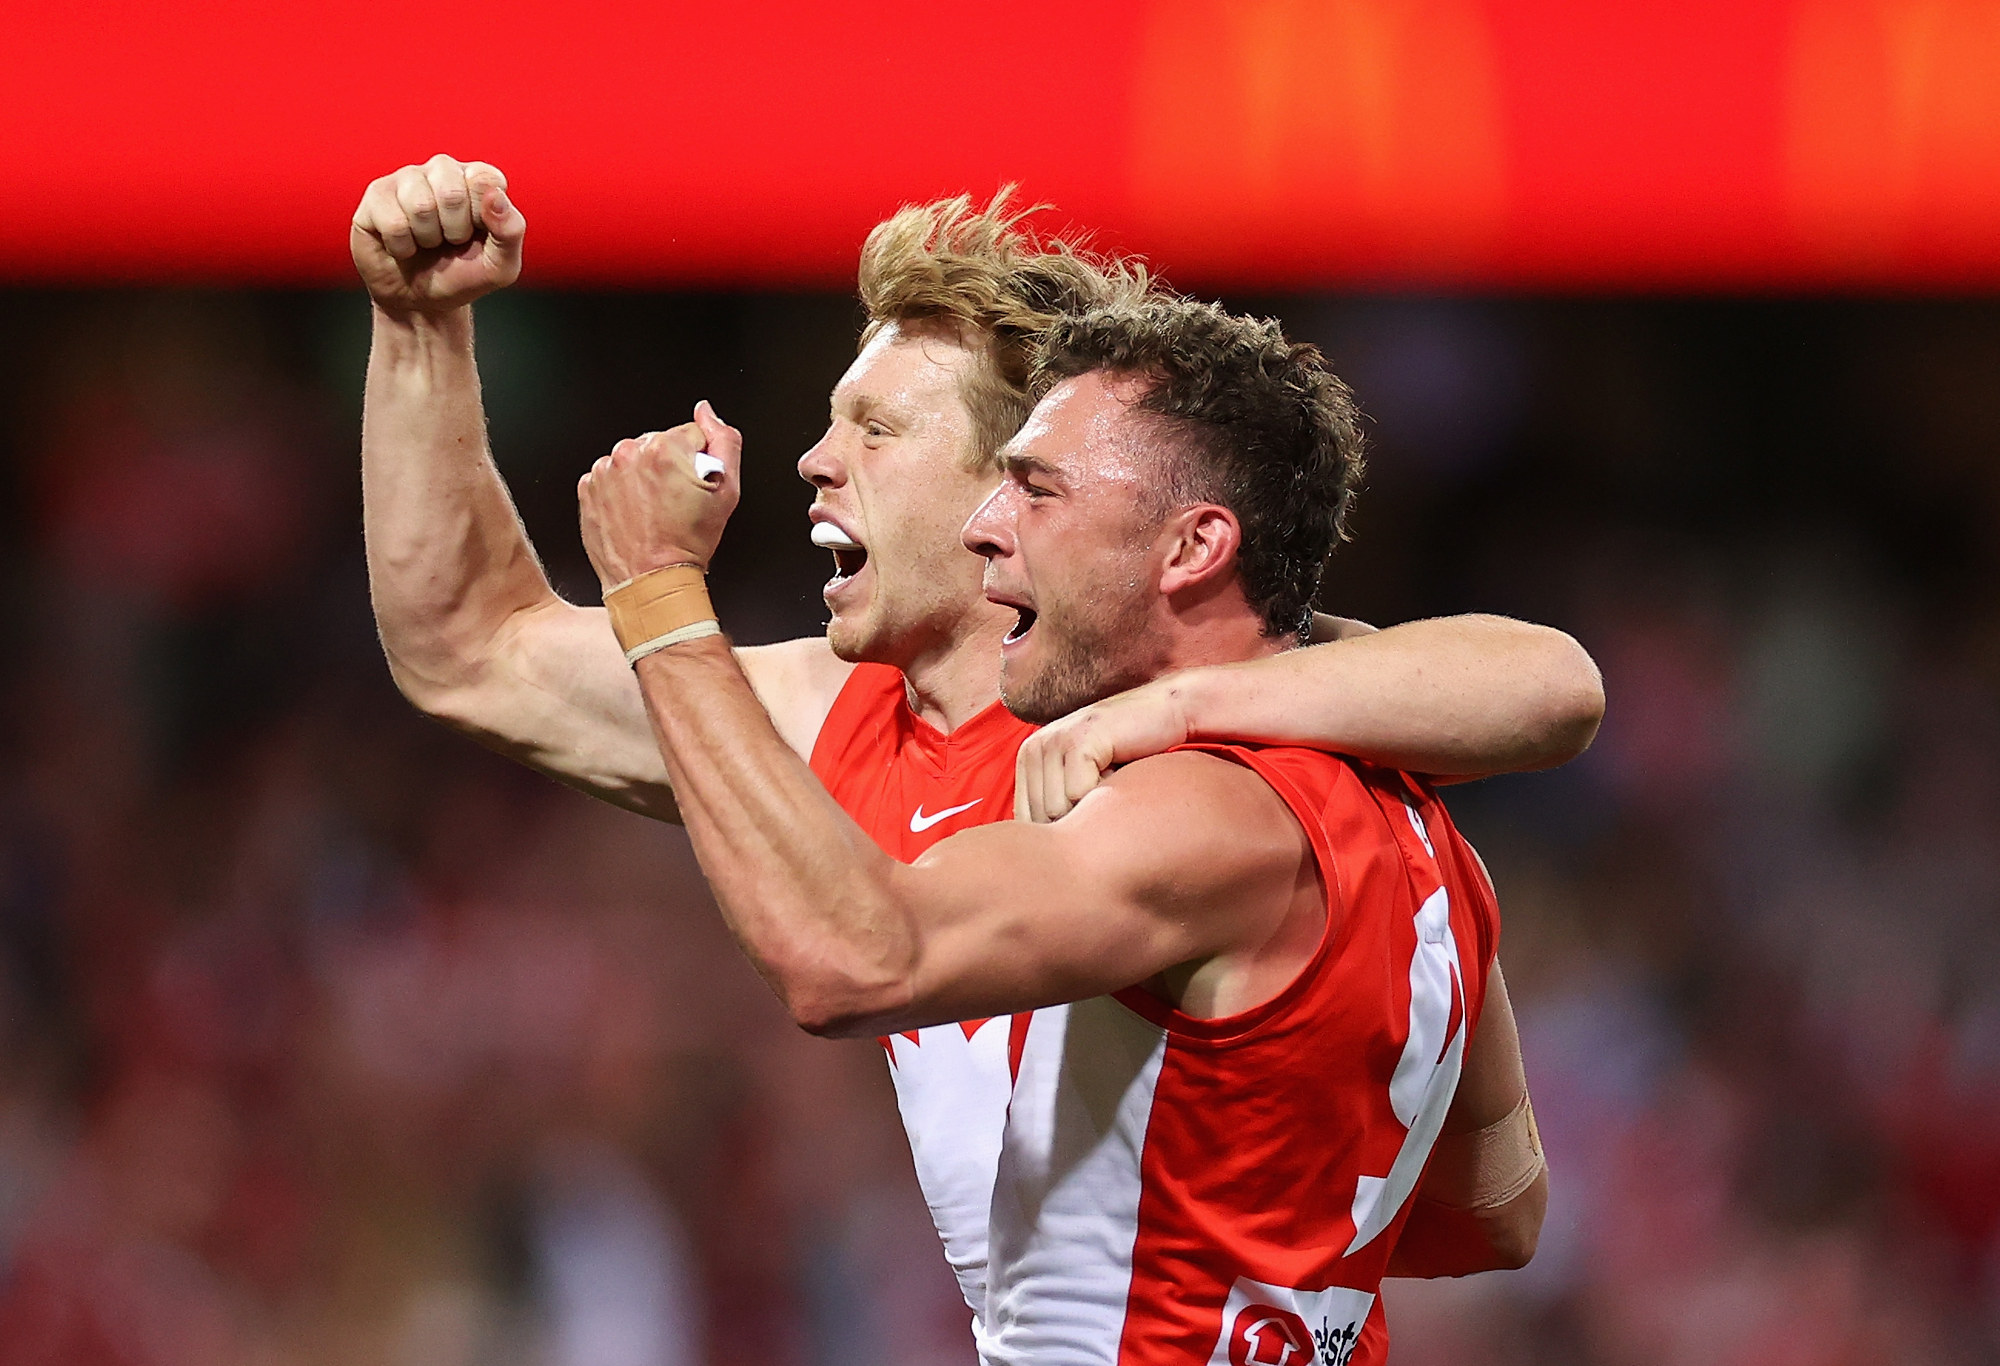 Will Hayward and Callum Mills of the Swans celebrate winning the preliminary final.